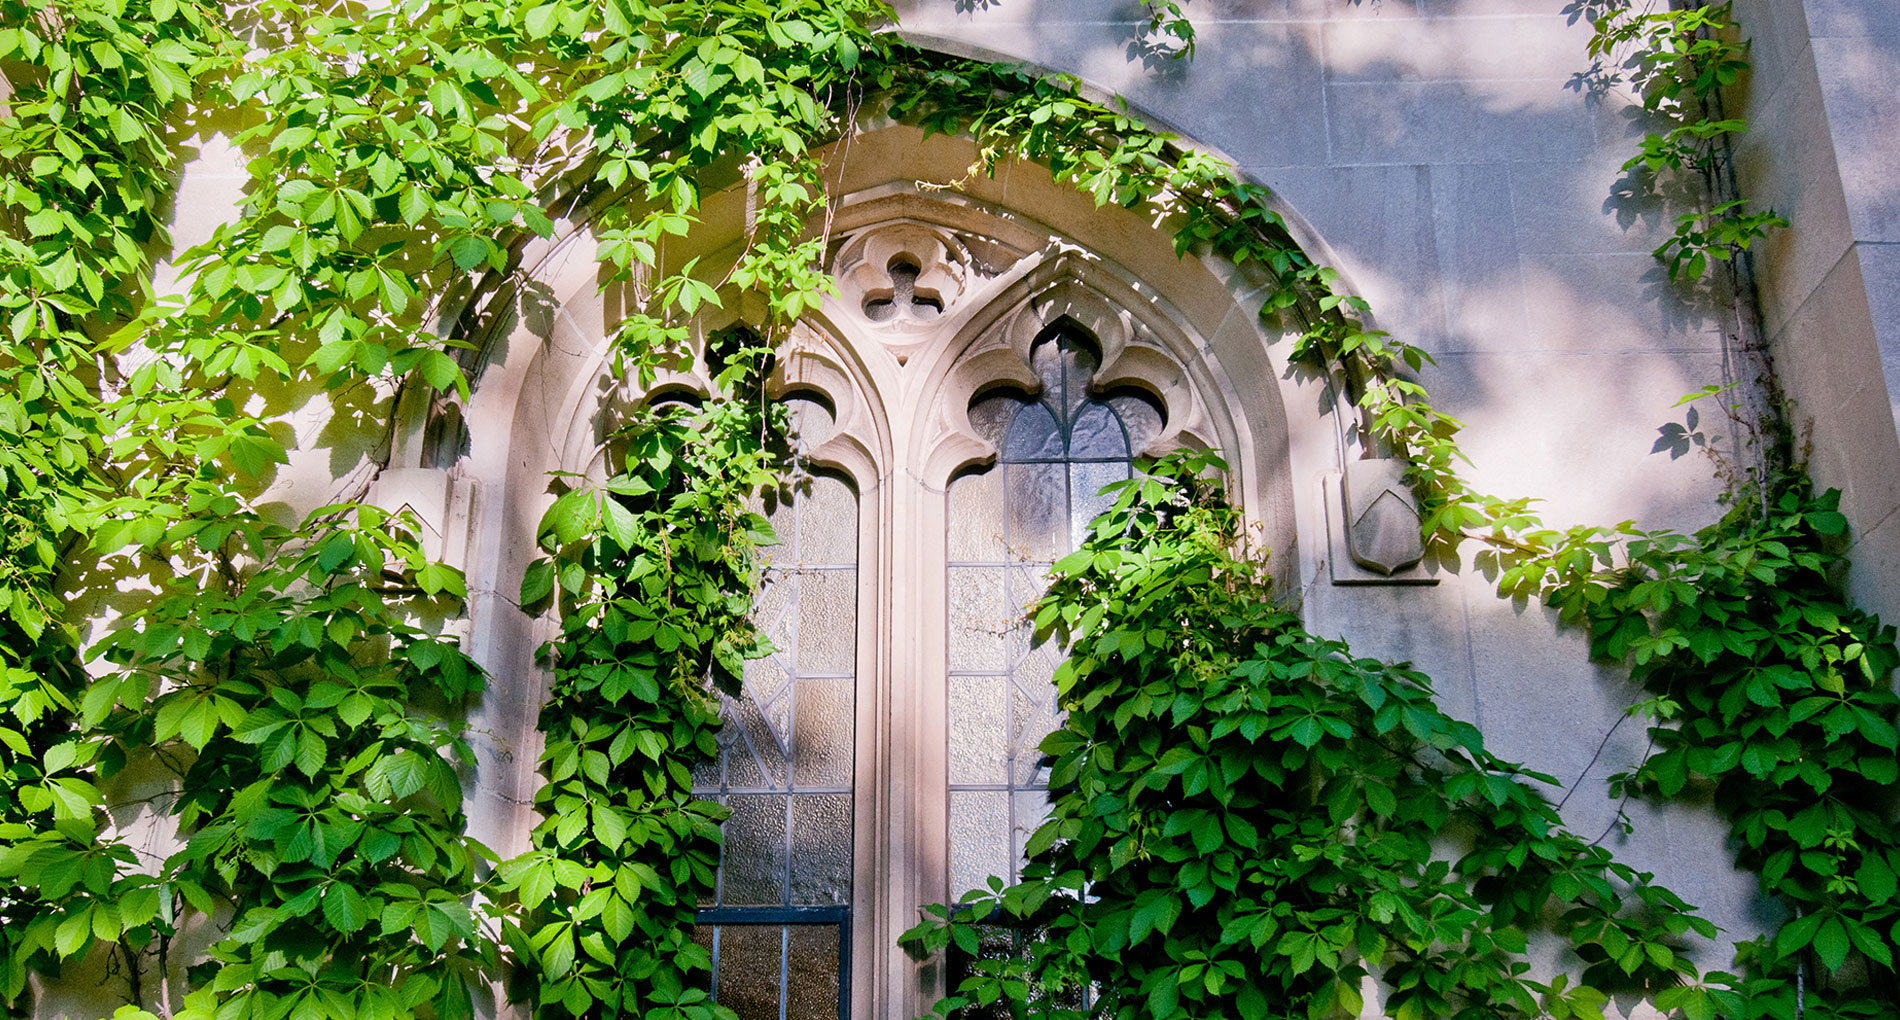 a arched window with vines growing on it